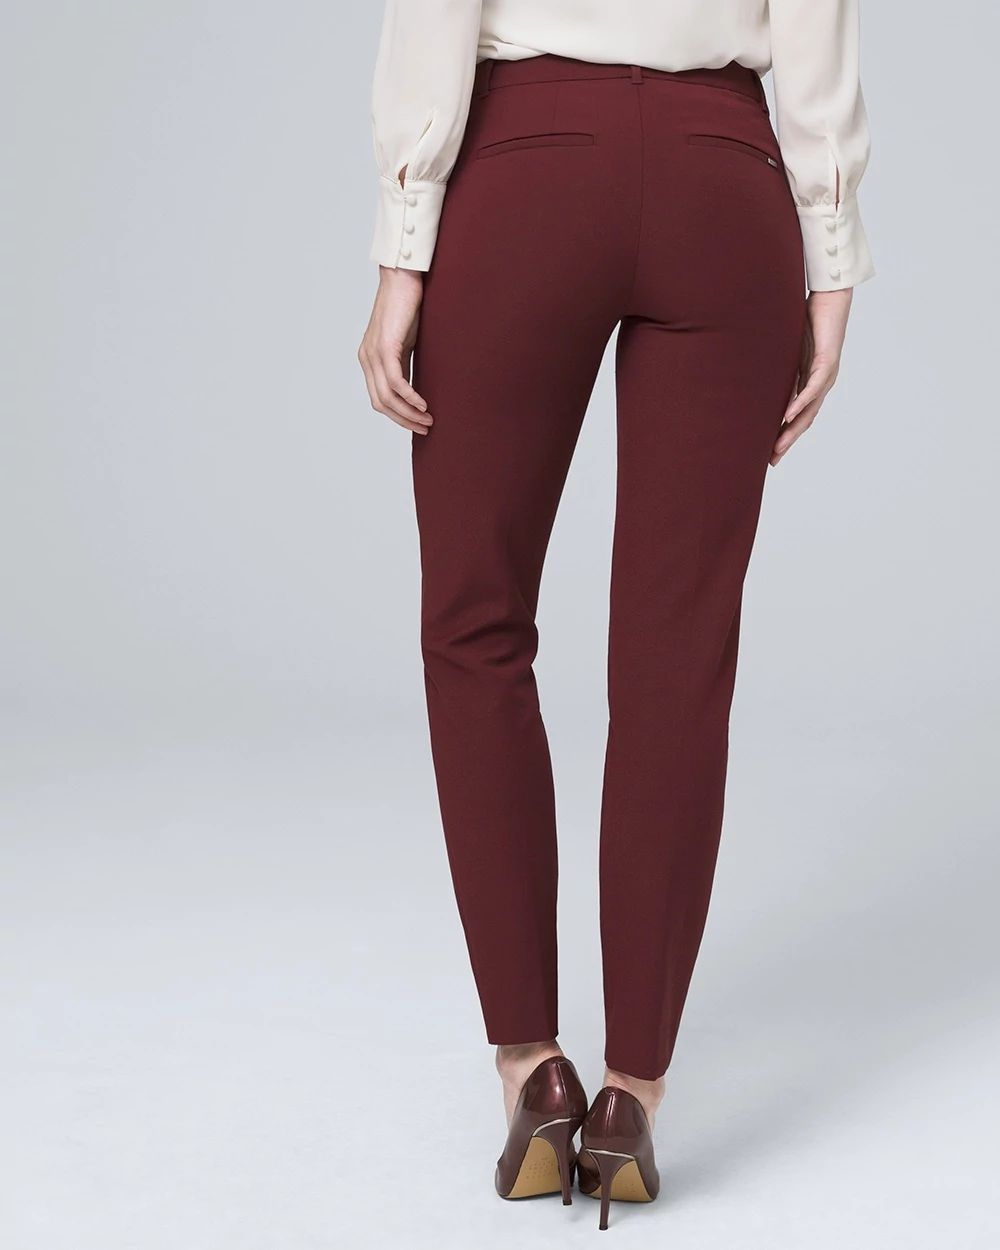 Comfort Stretch Slim Ankle Pants click to view larger image.